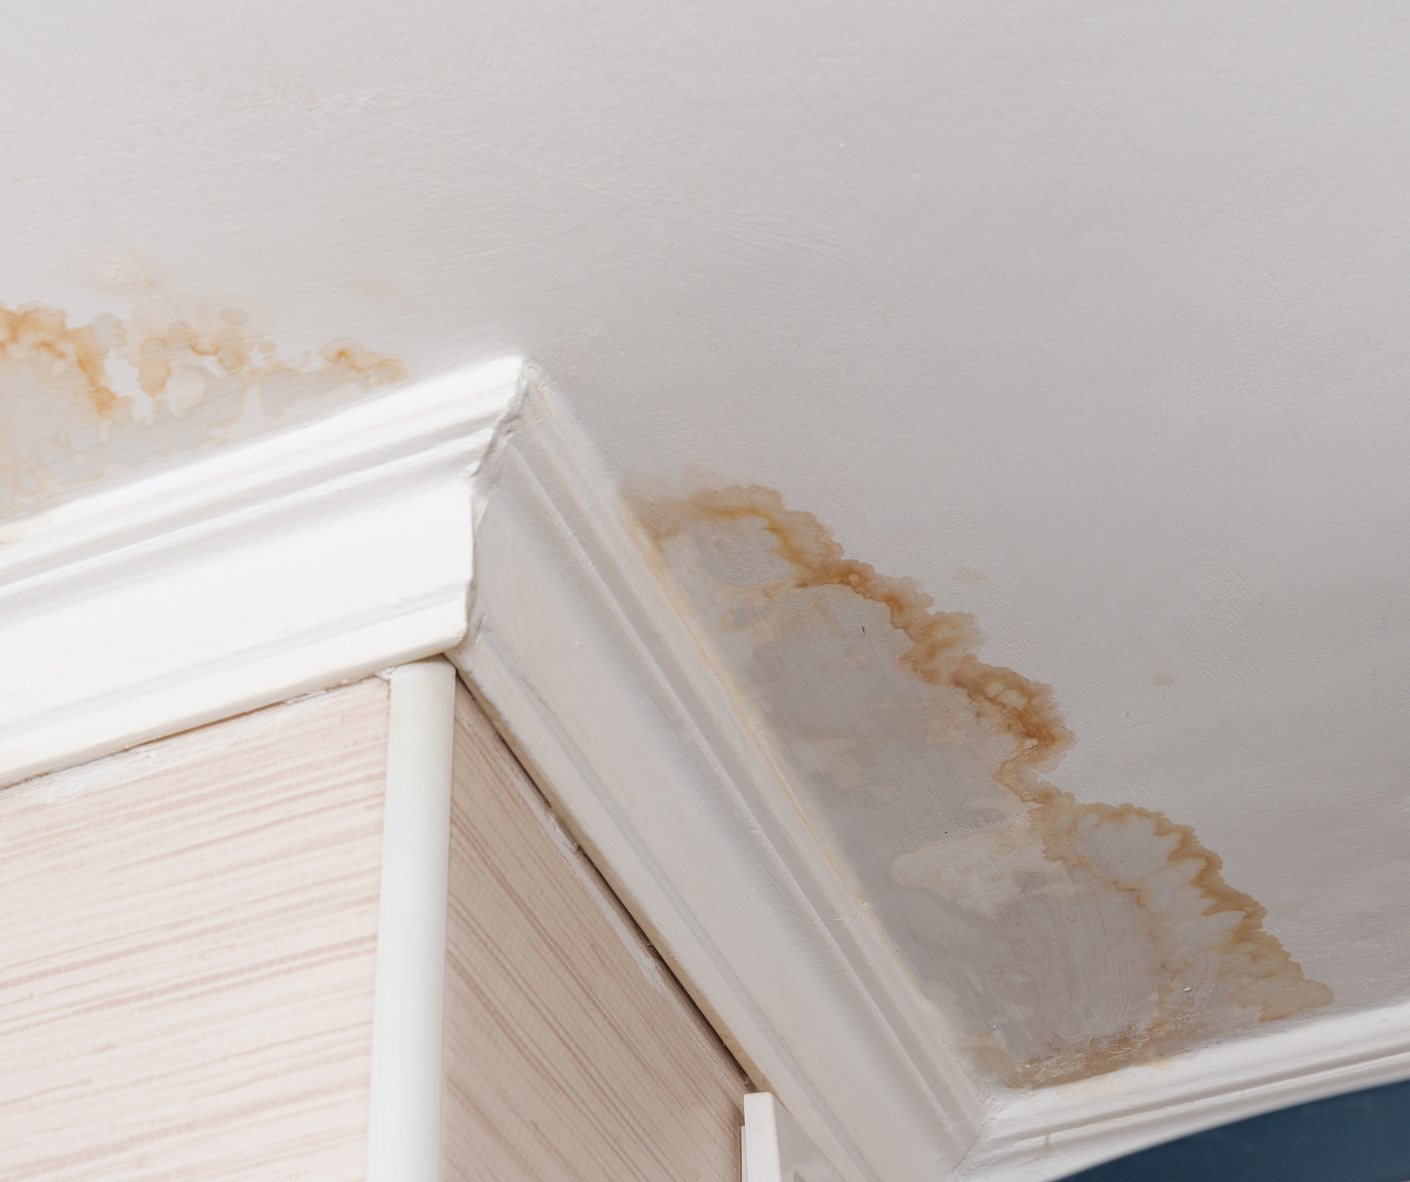 ceiling leak signs of mold